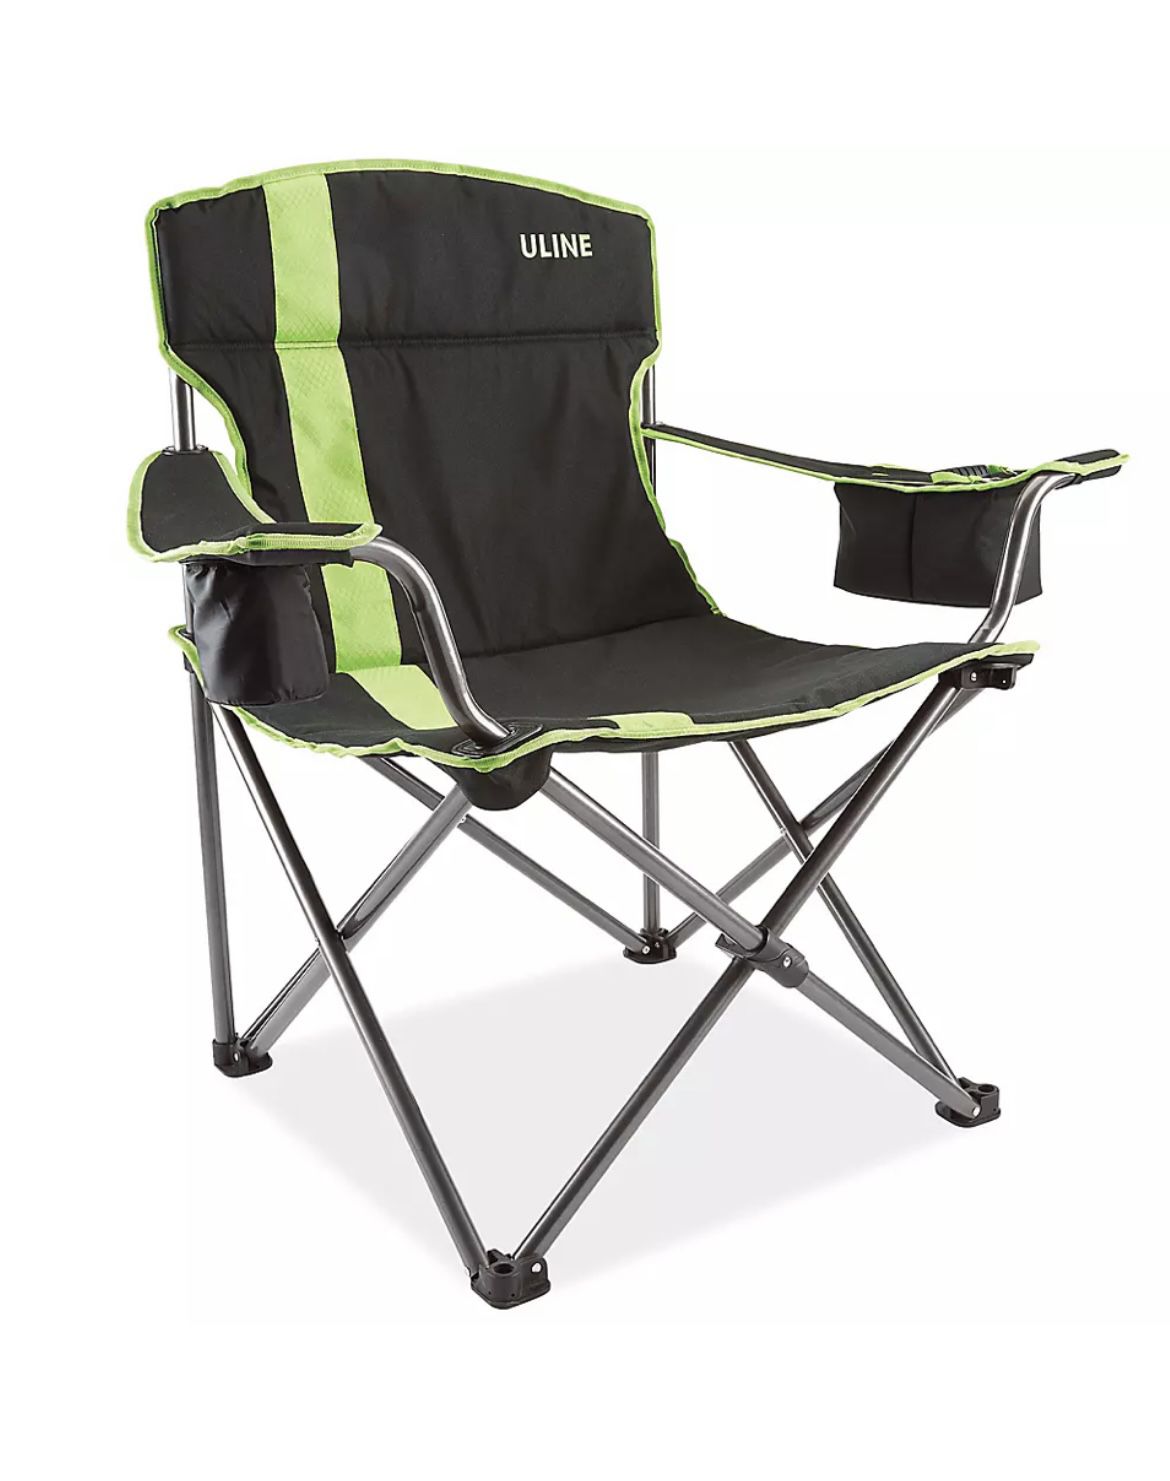 Camping / Picnic  Chair / Cooler   New